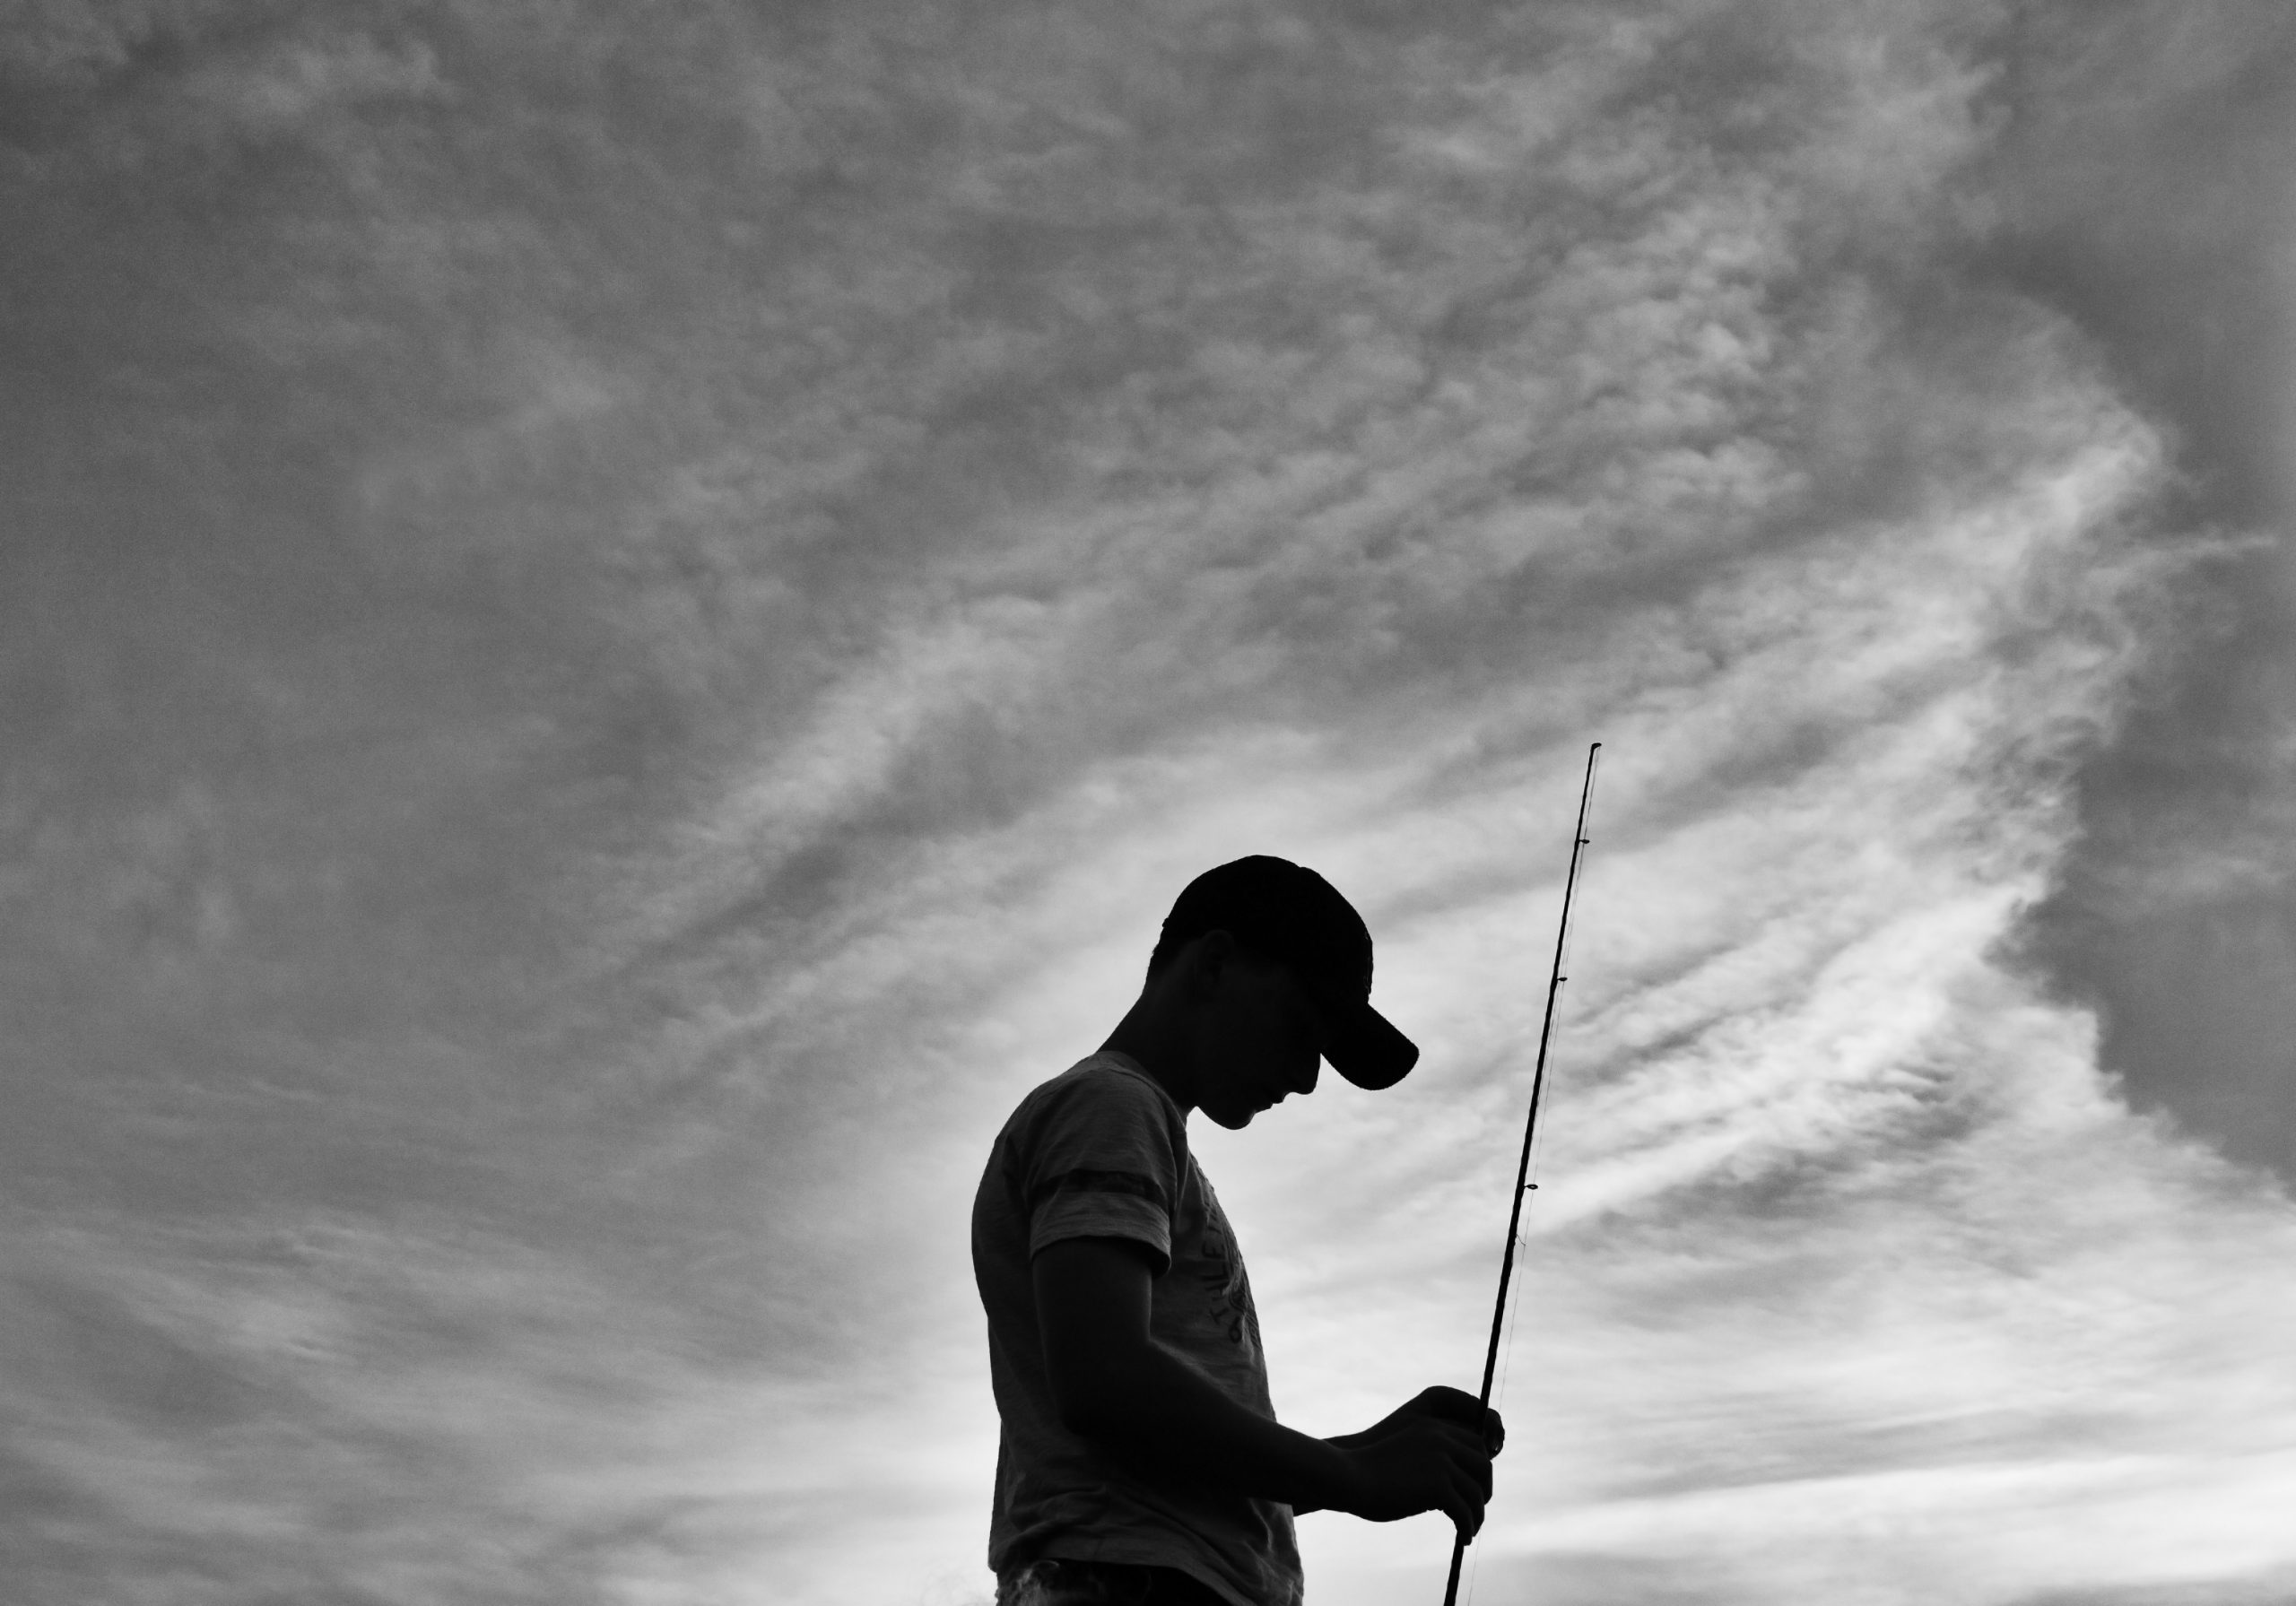 North Carolina's Recreational Anglers Face Total Burden Of